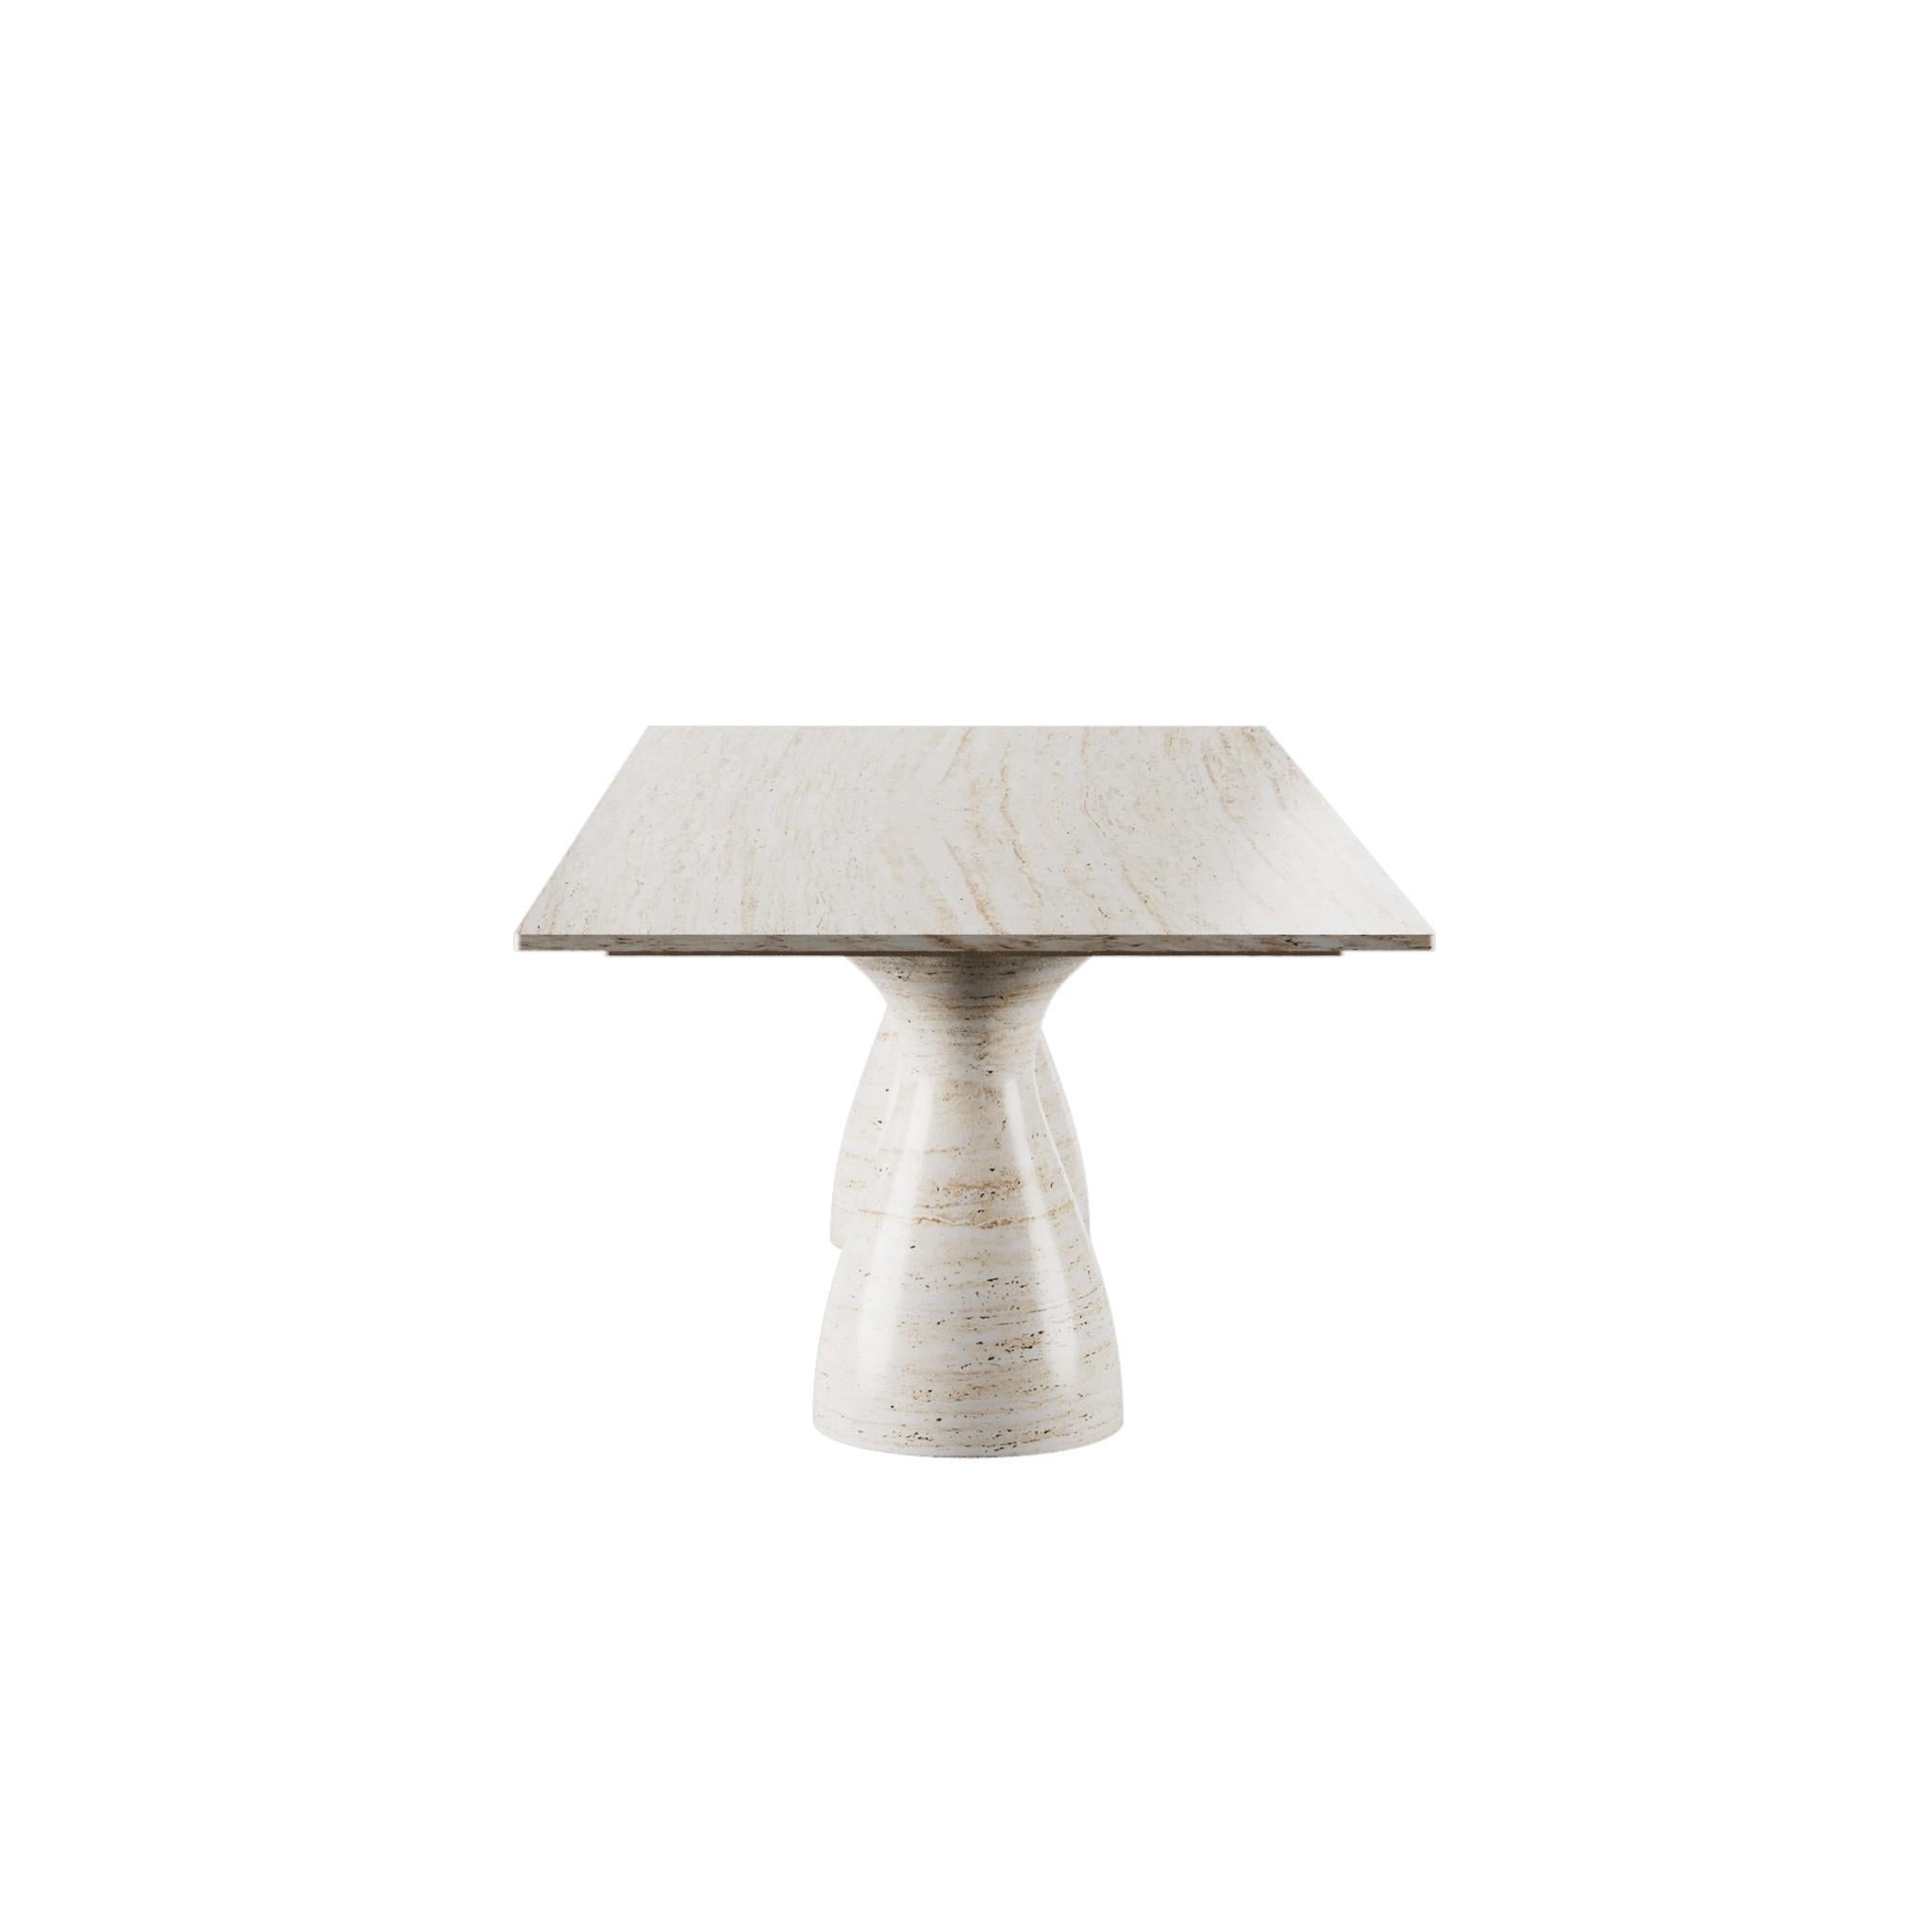 Minimal Scandinavian Modern White Dining Table in Travertine Marble Curved Legs In New Condition For Sale In Porto, PT